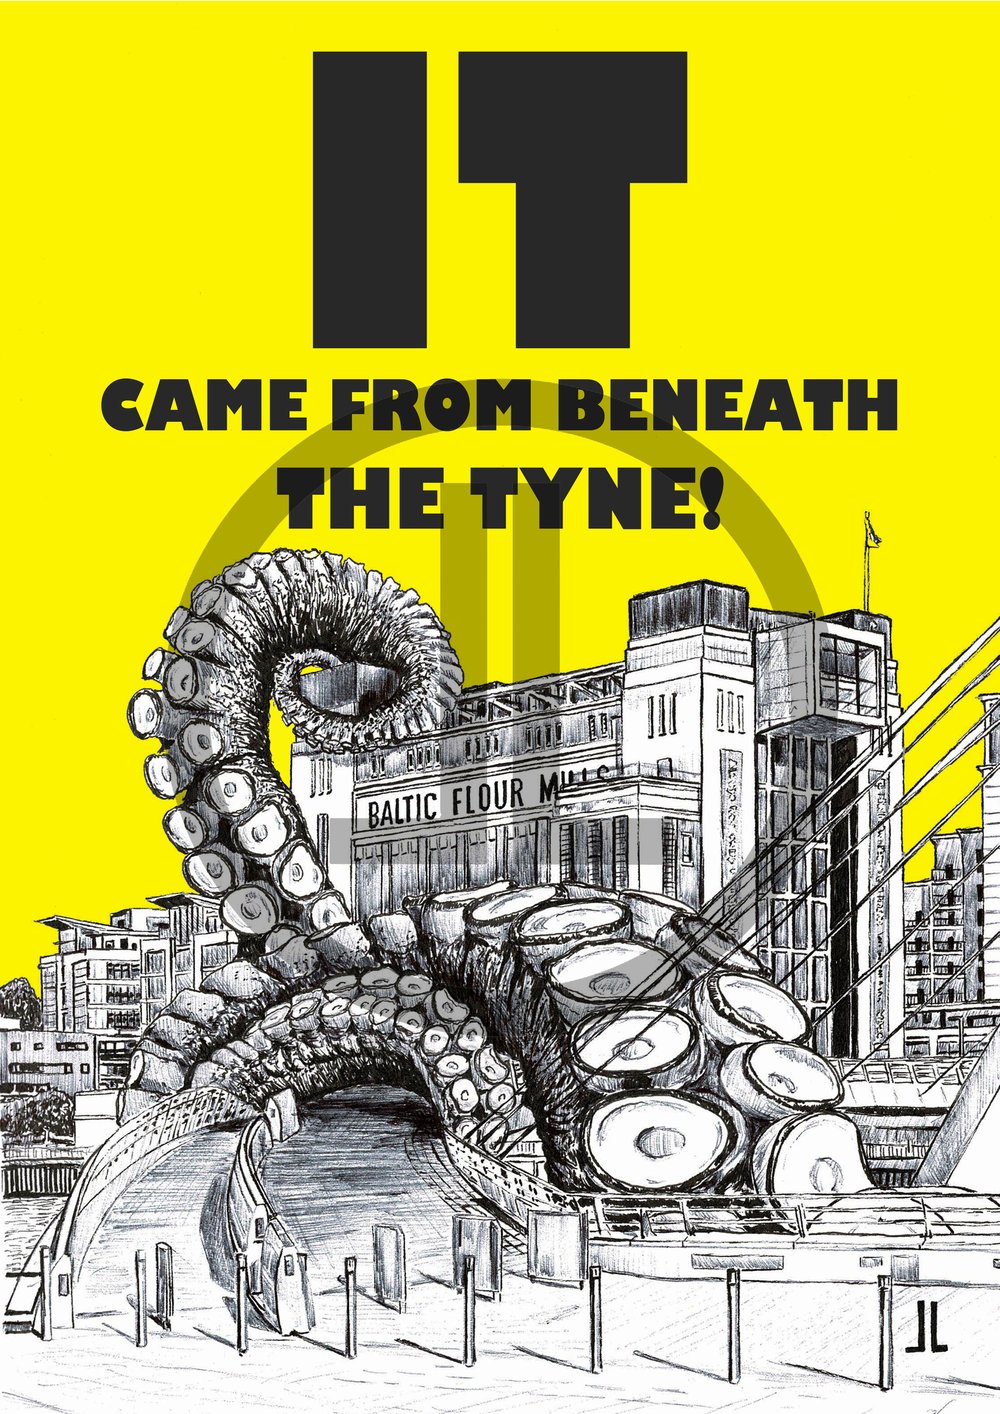 'IT Came From Beneath the Tyne!' - Newcastle 